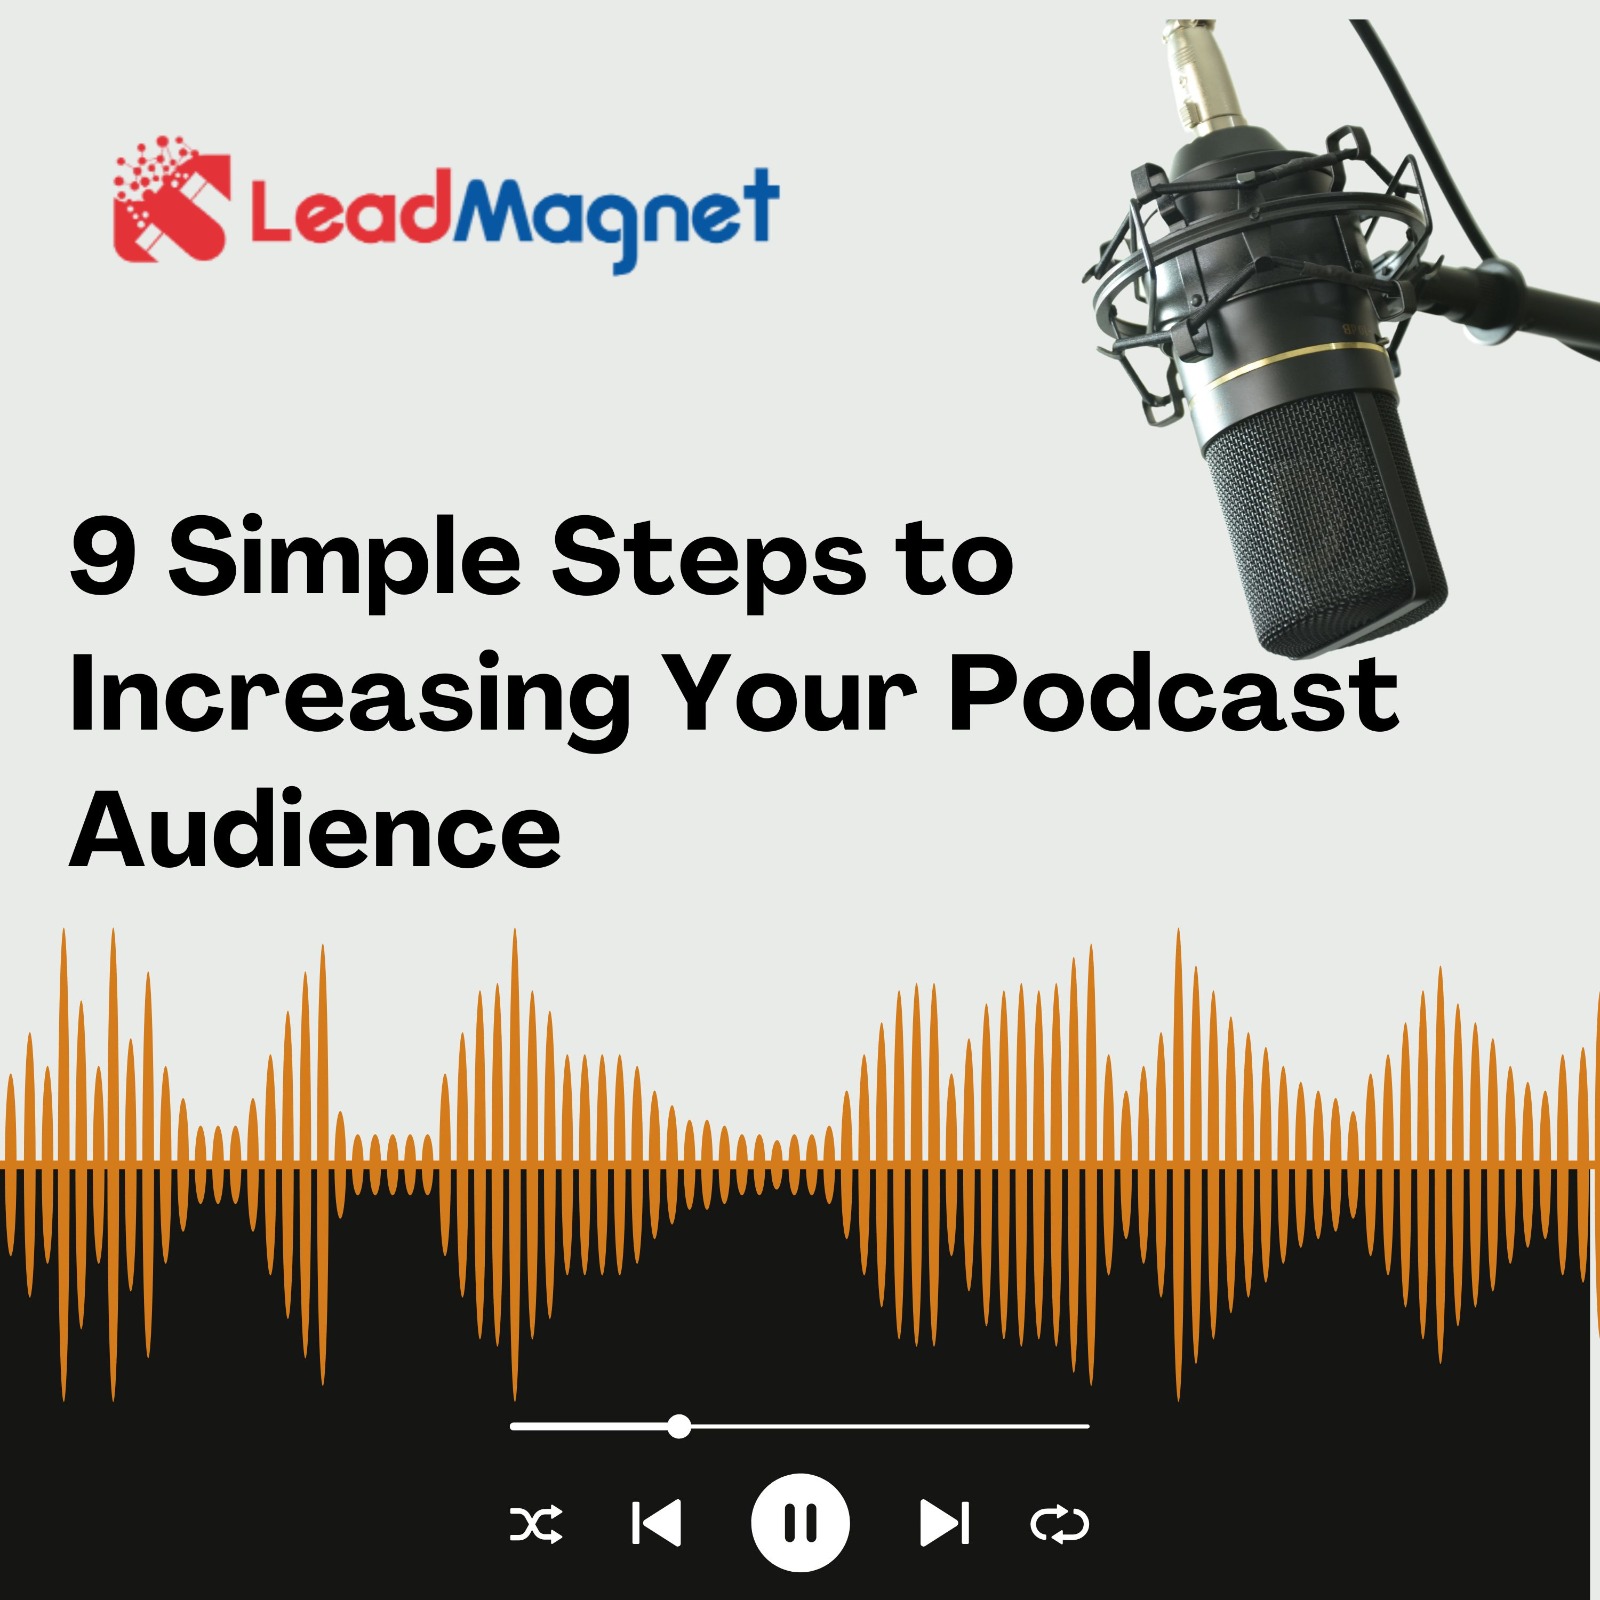 9 Simple Steps to Increasing Your Podcast Audience